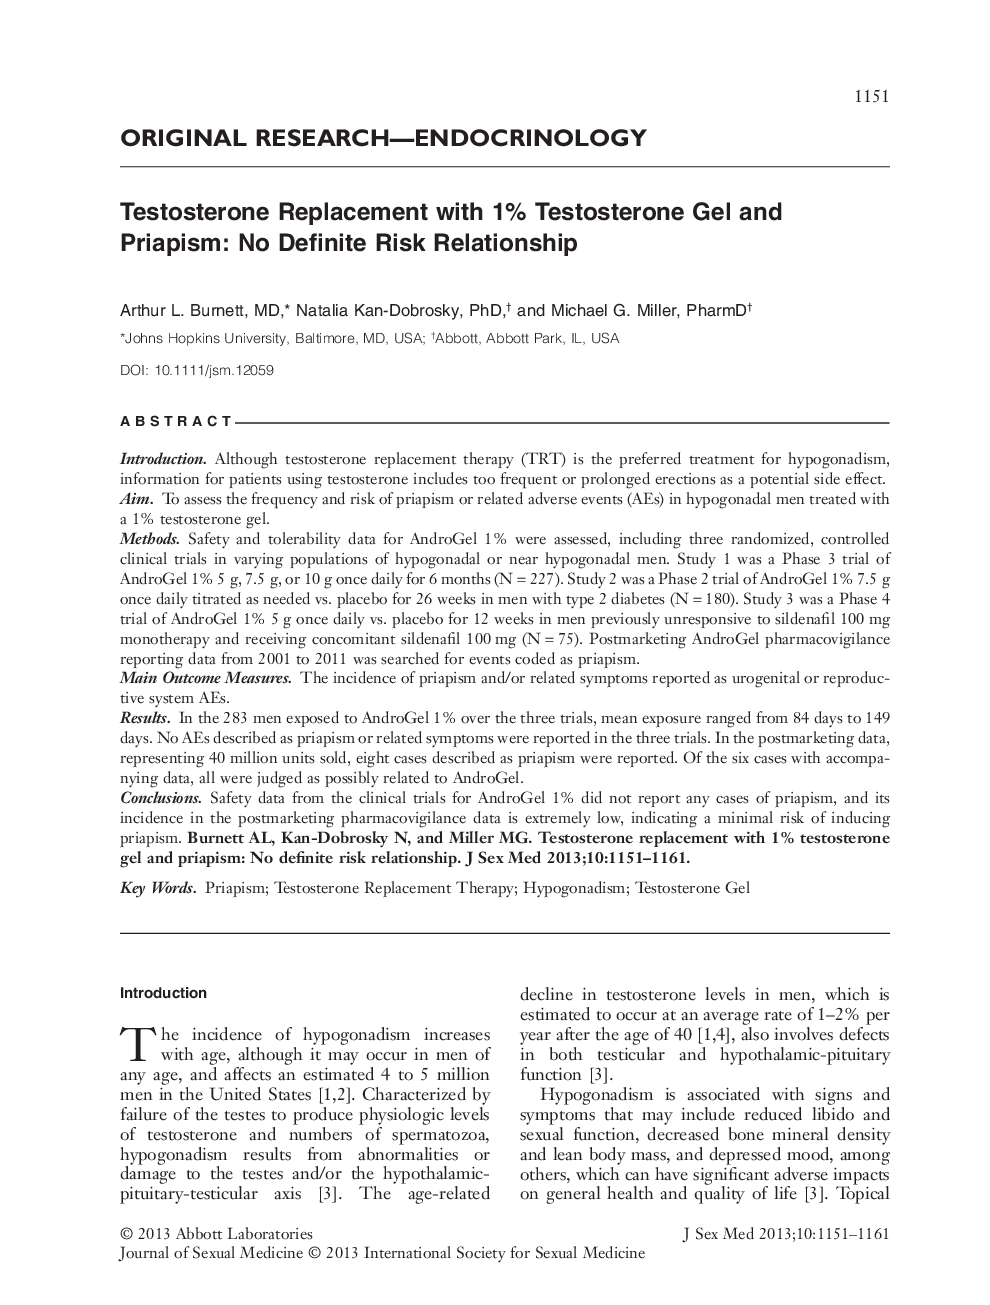 Testosterone Replacement with 1% Testosterone Gel and Priapism: No Definite Risk Relationship